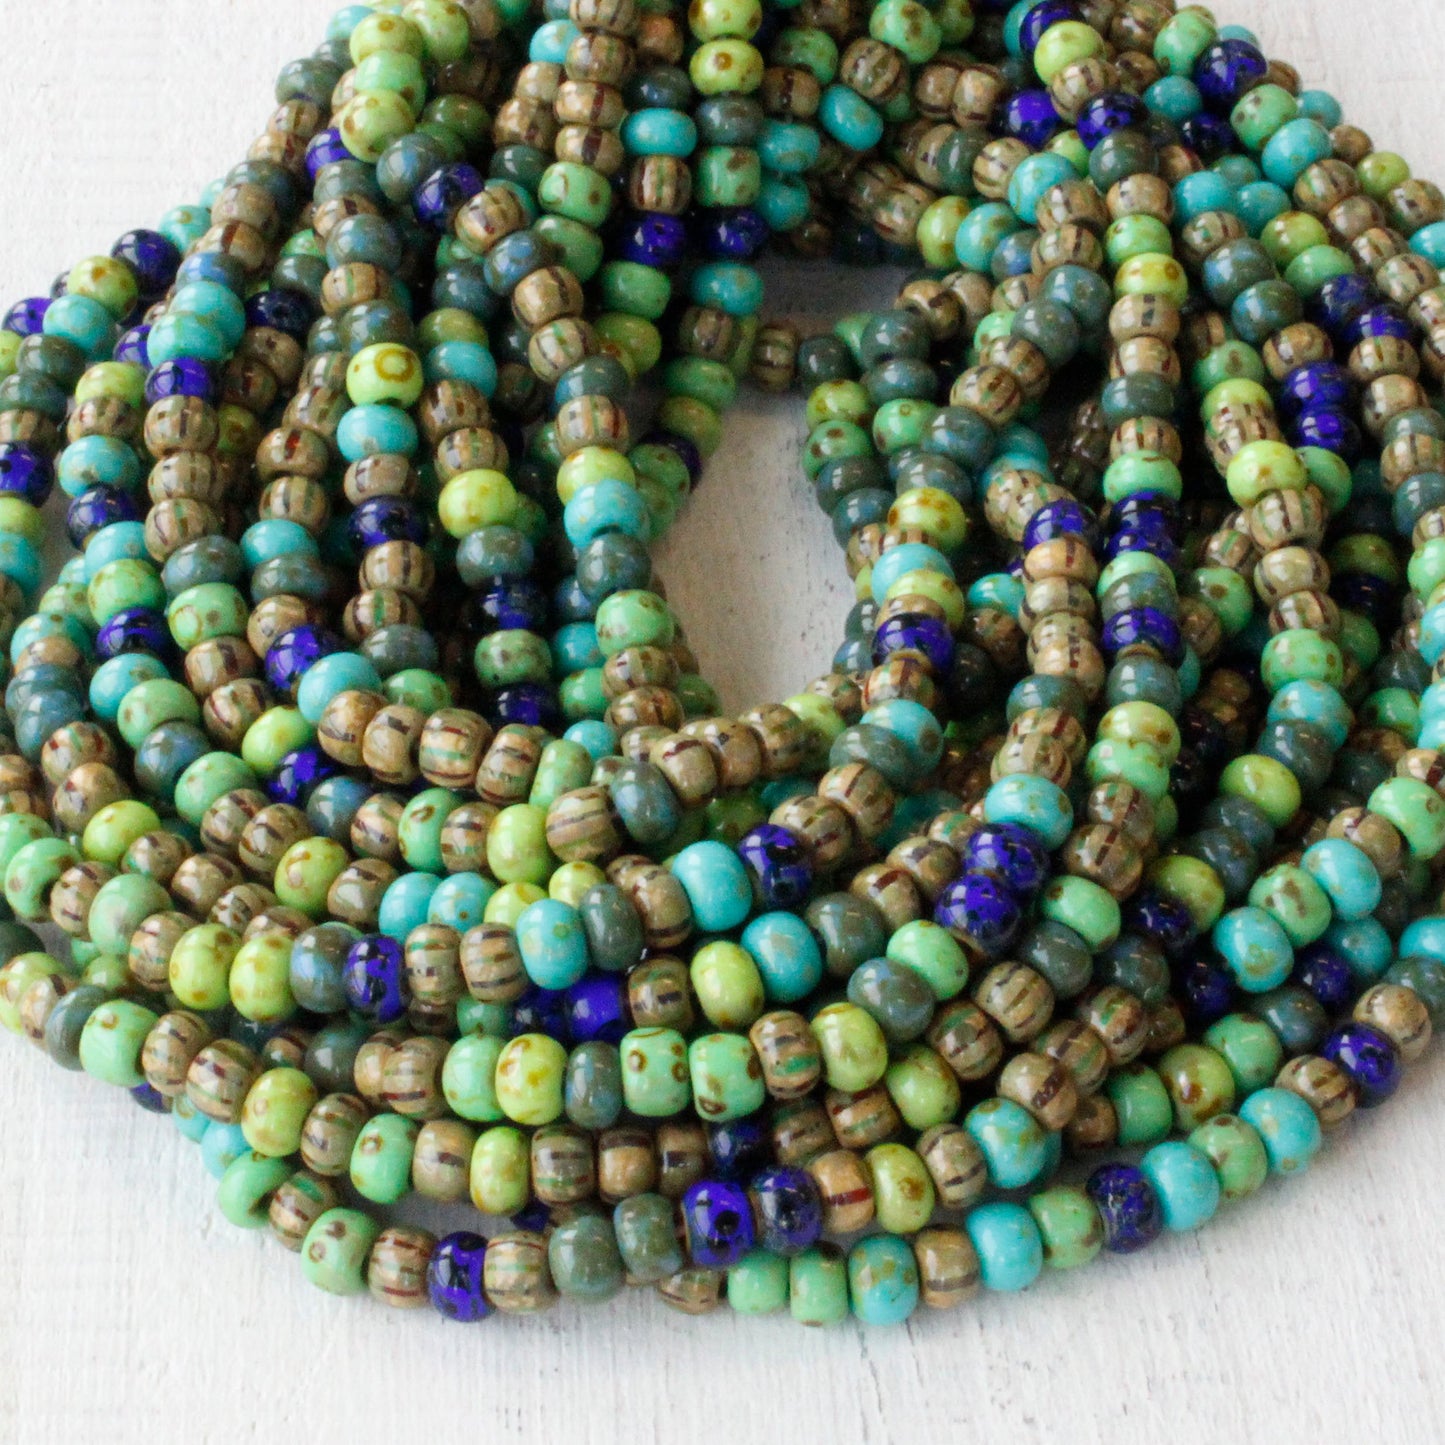 Size 5 Seed Beads - Striped Tropical Mix - 20 or 60 inches